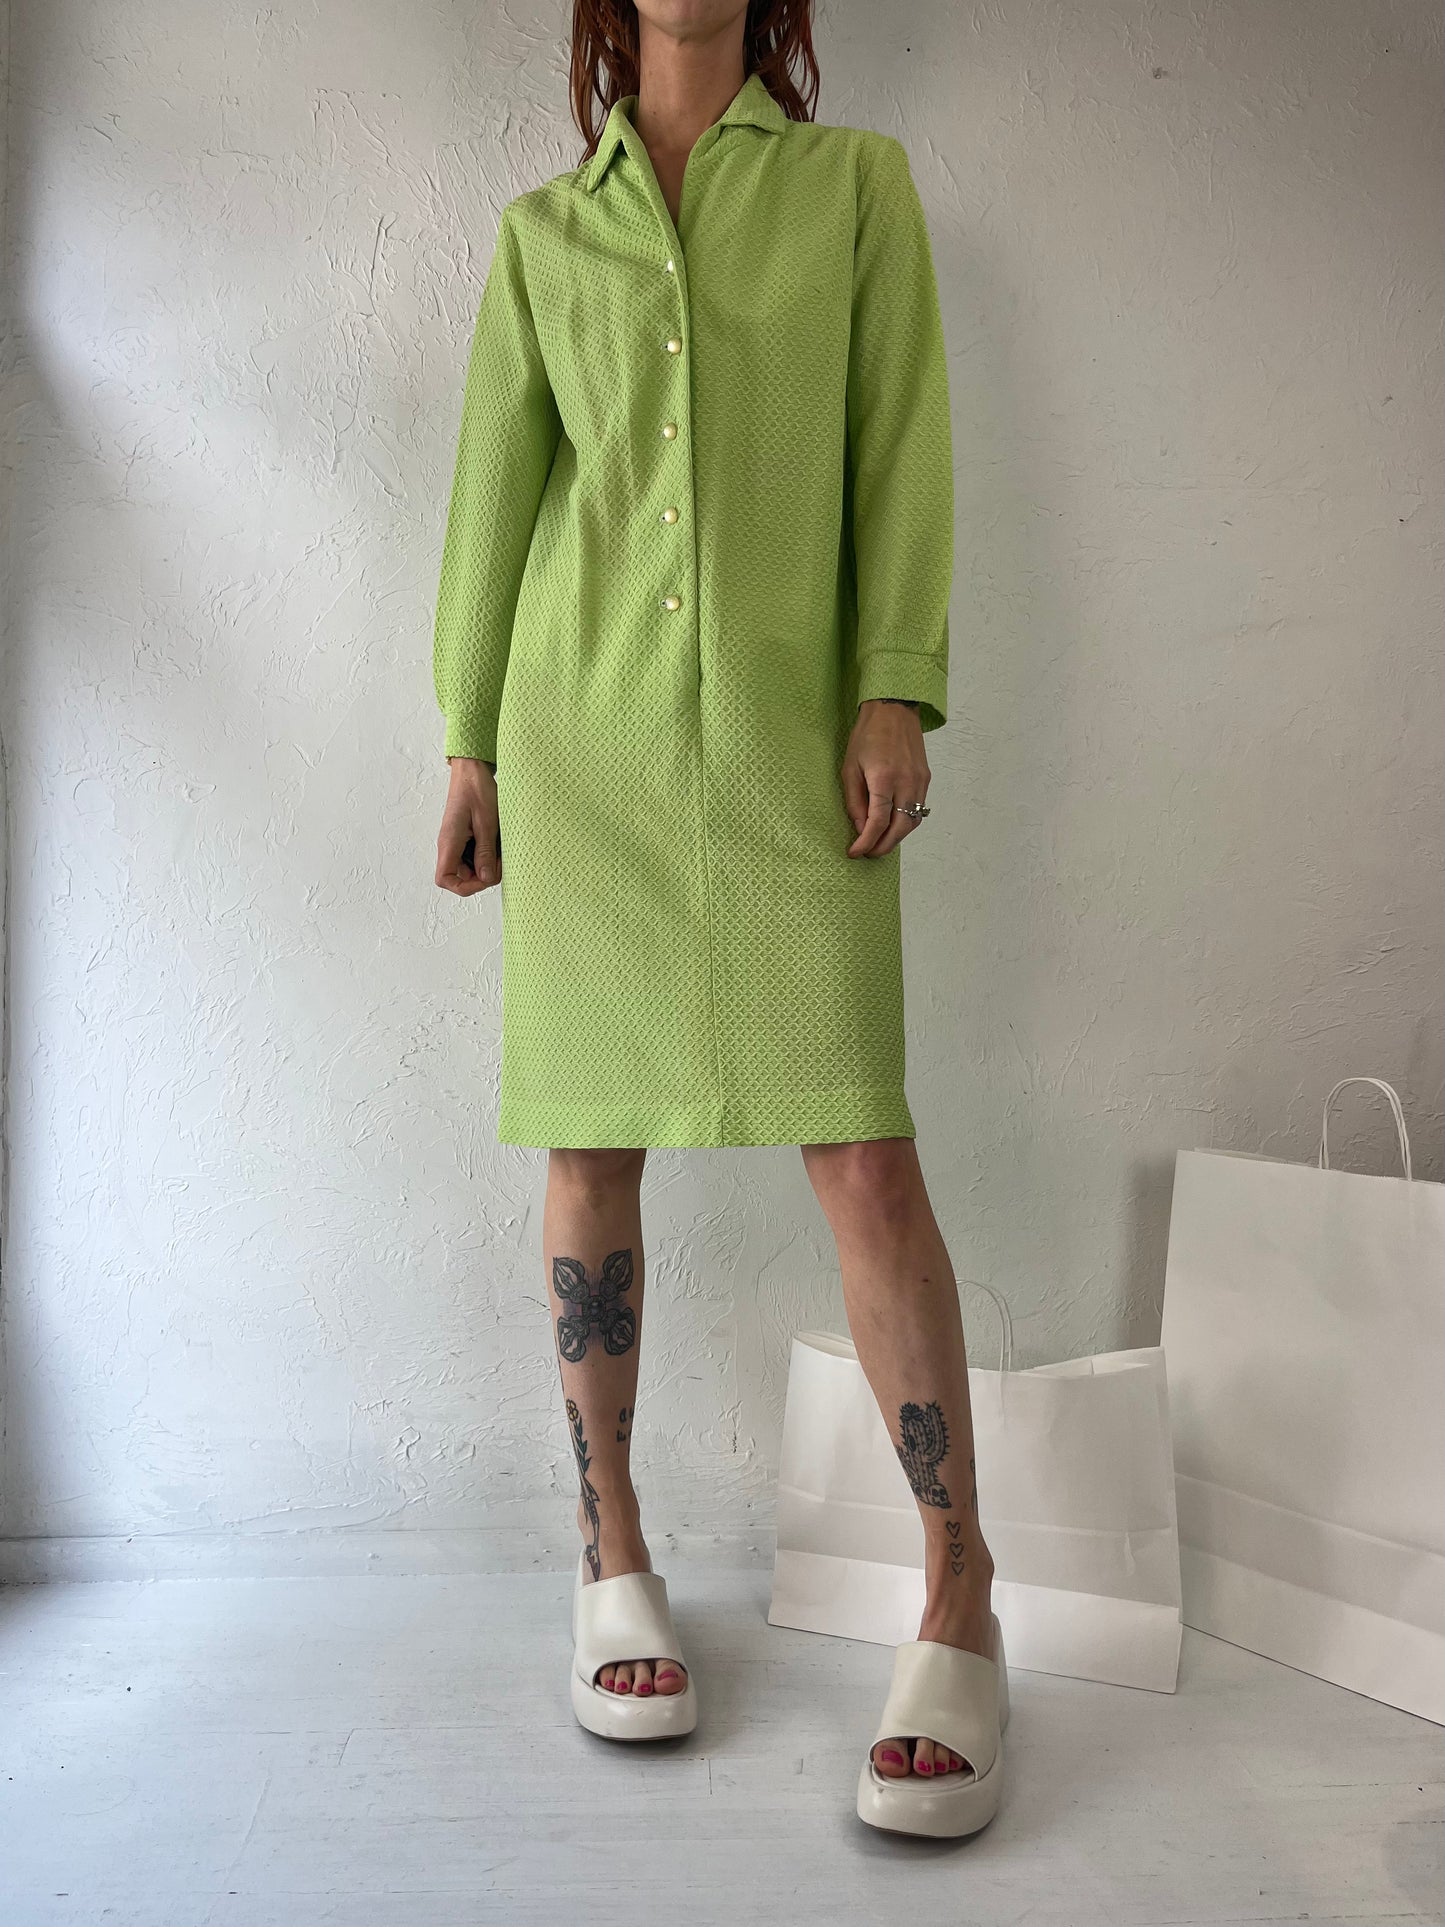 Y2K 'Giselle' Lime Green Collared Dress / Medium